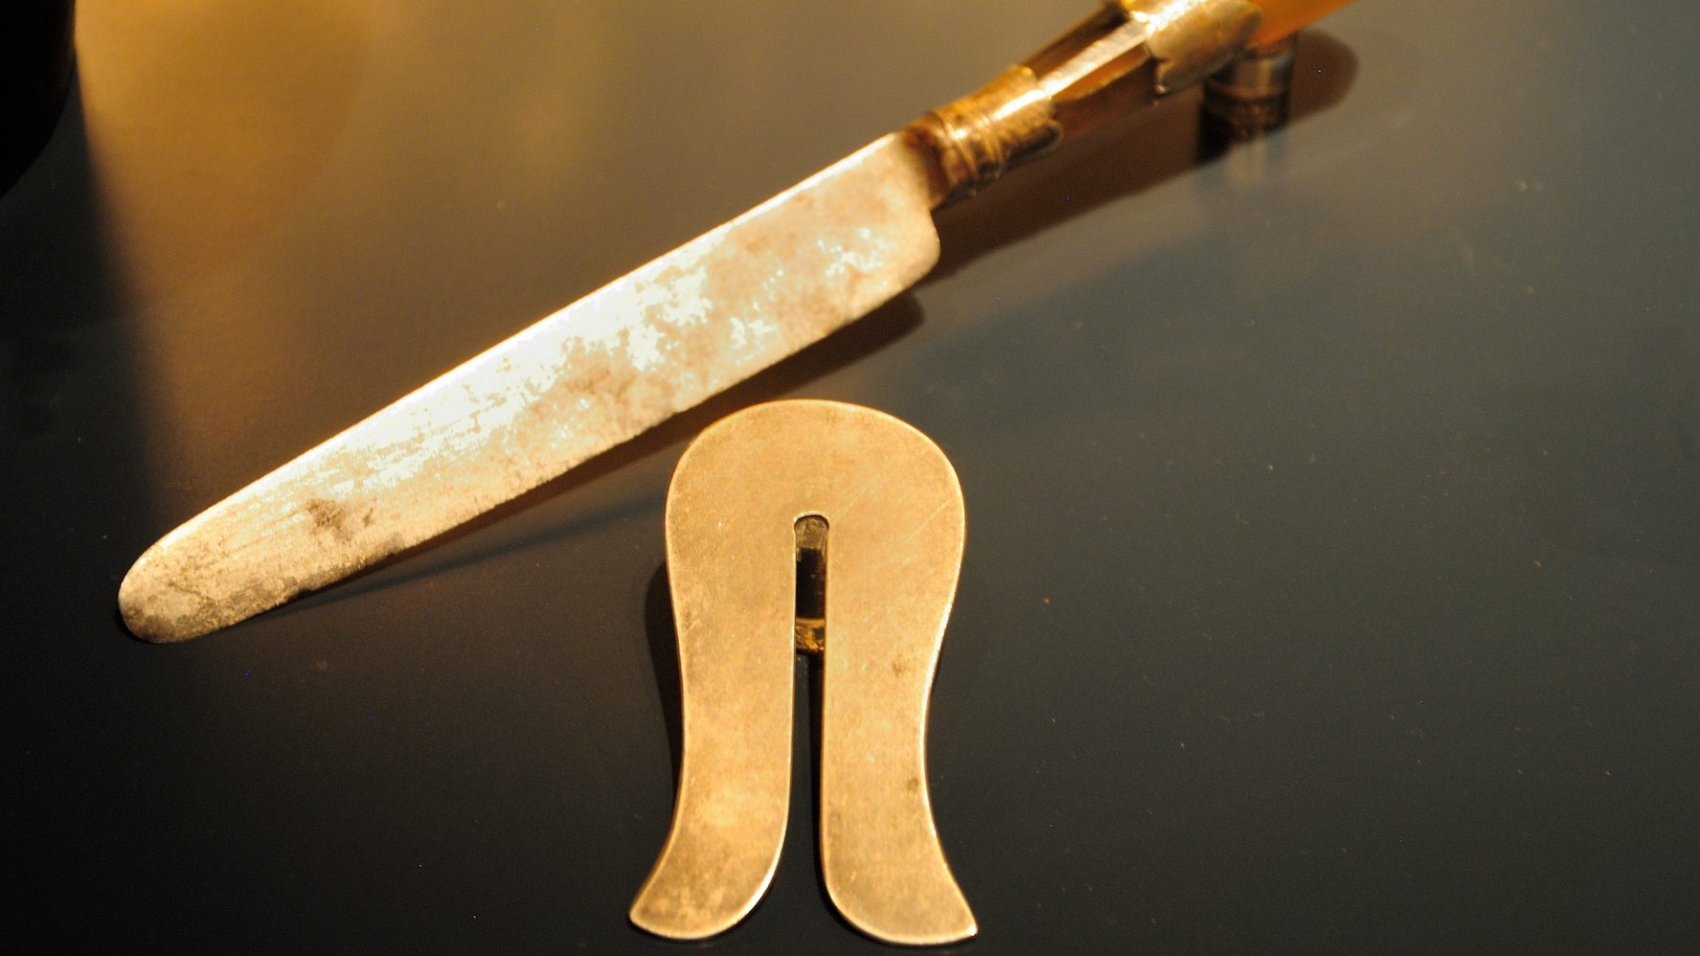 Jewish circumcision knife used at the brit milah ceremony